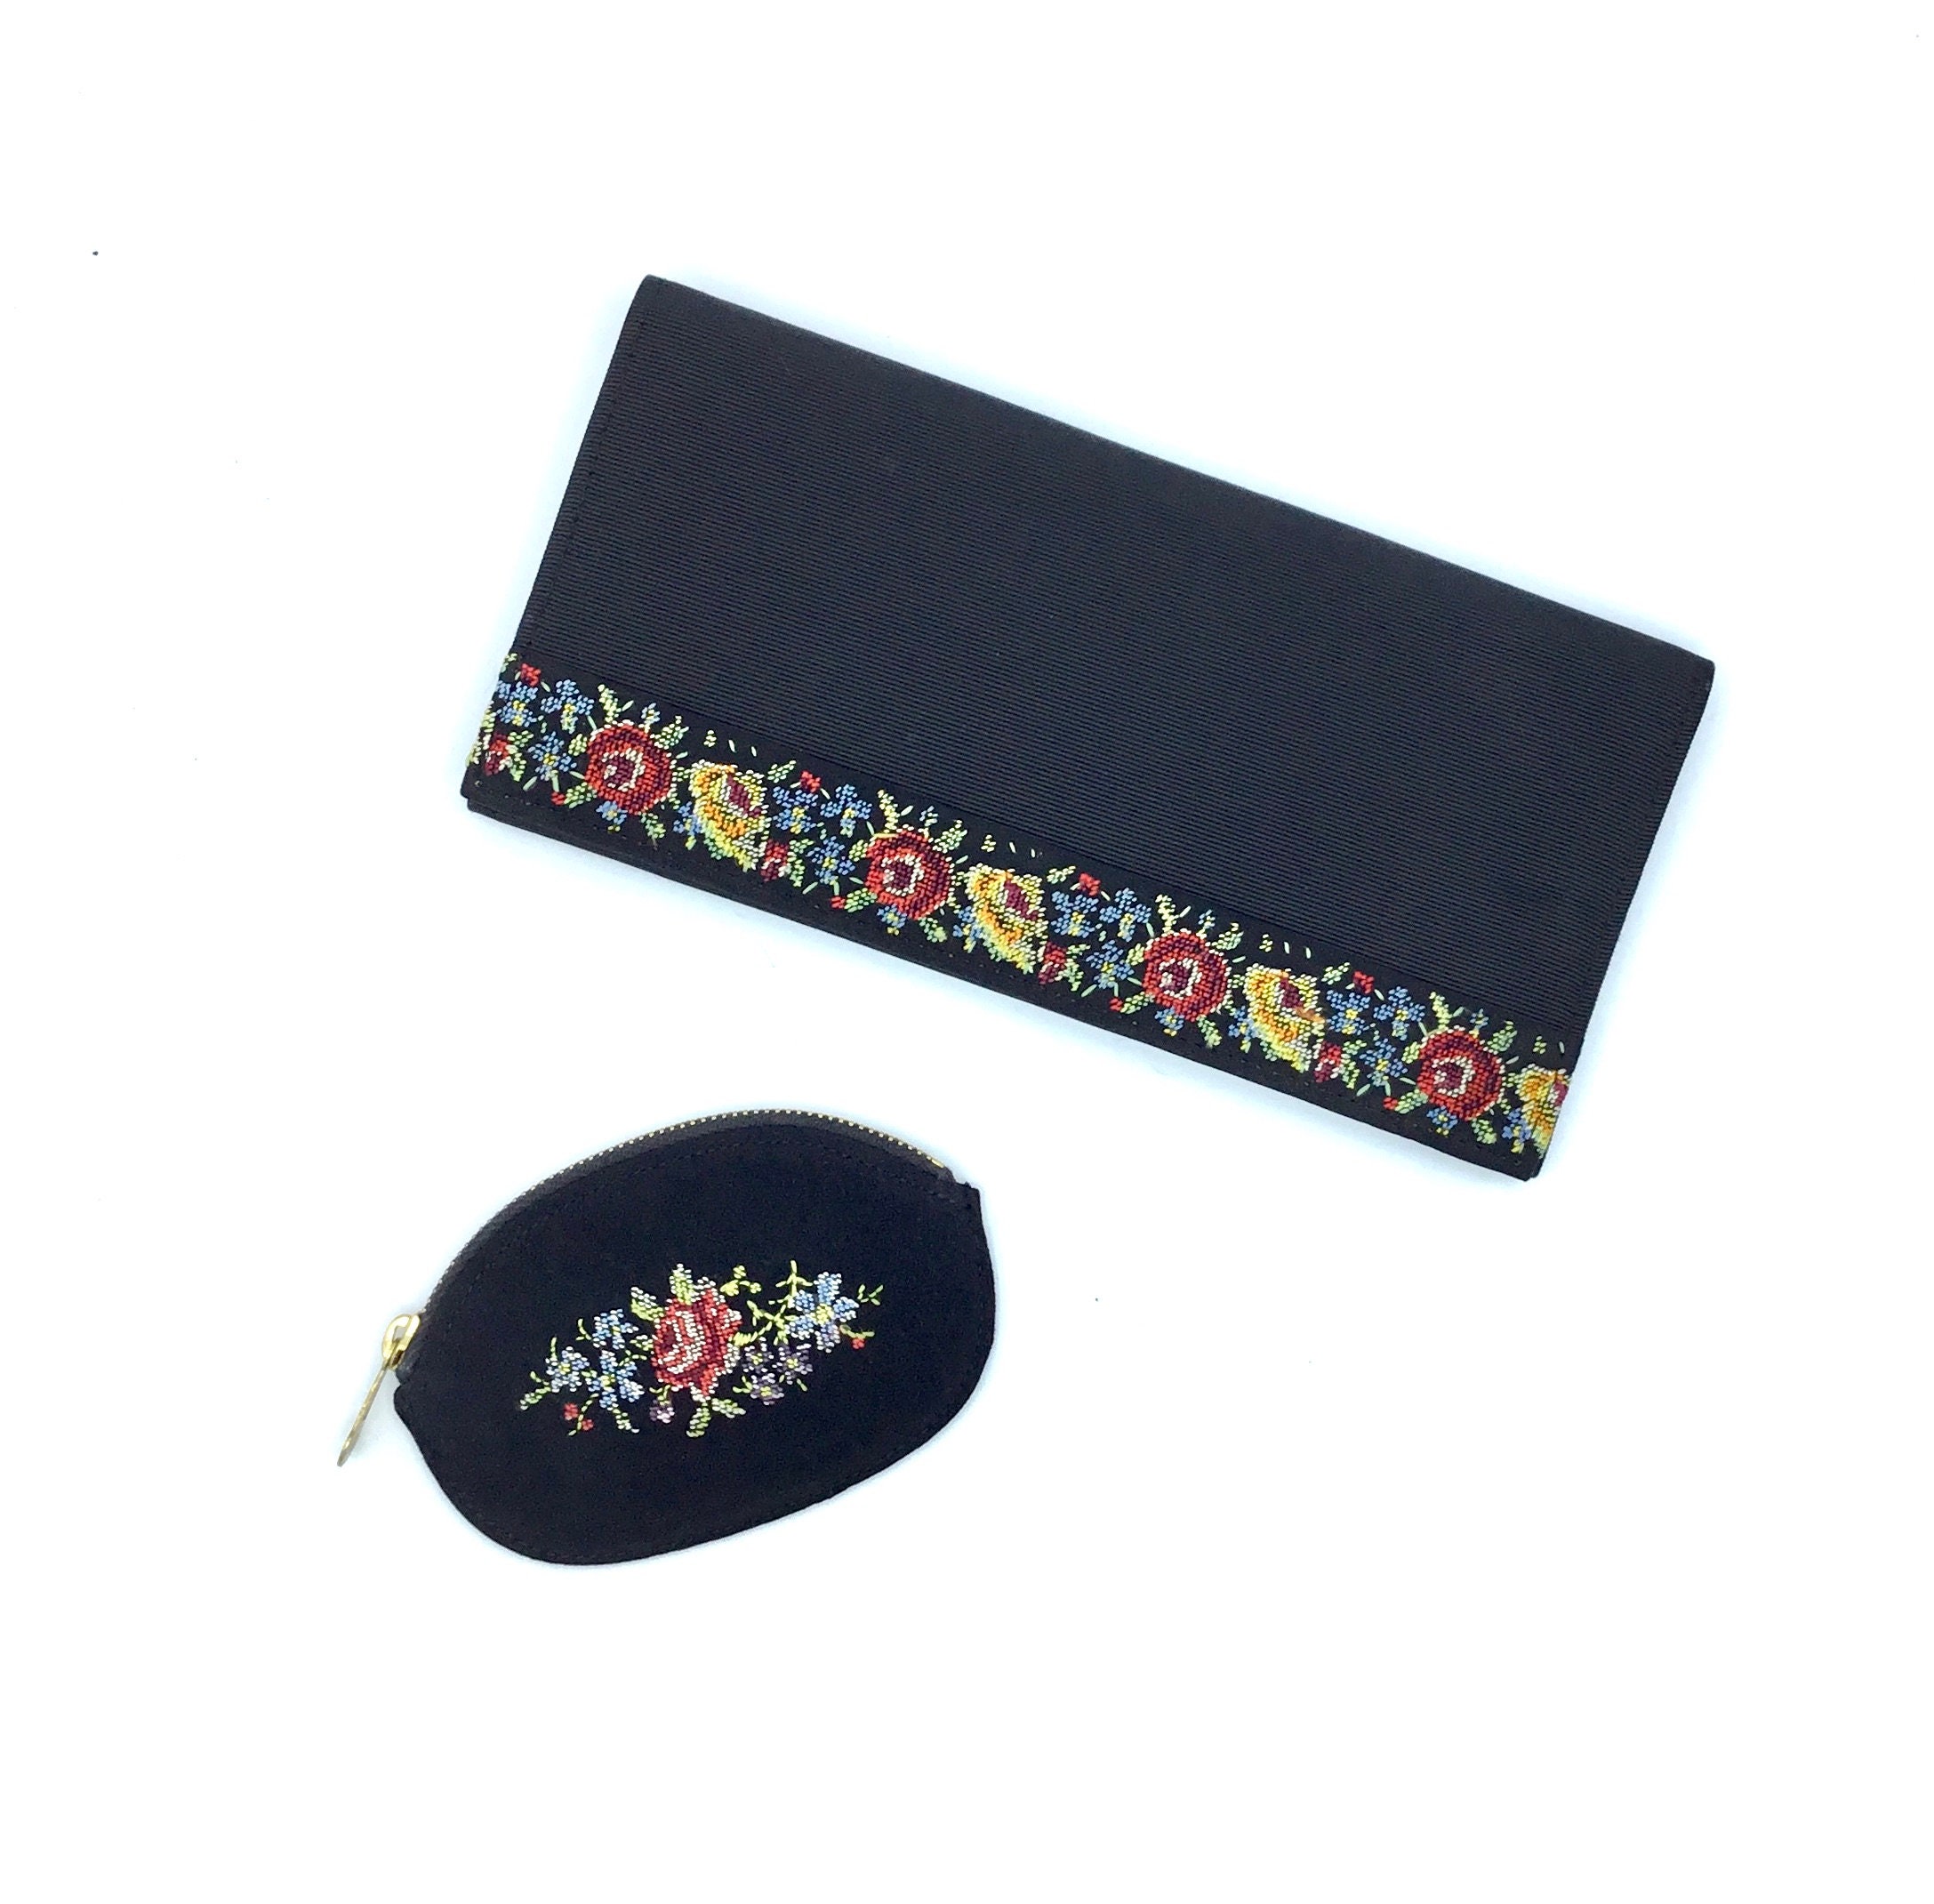 Vintage 1960s Black Floral Petit Point Clutch, Mid-Century Faille Fabric Evening Bag W/Matching Coin Purse, VFG